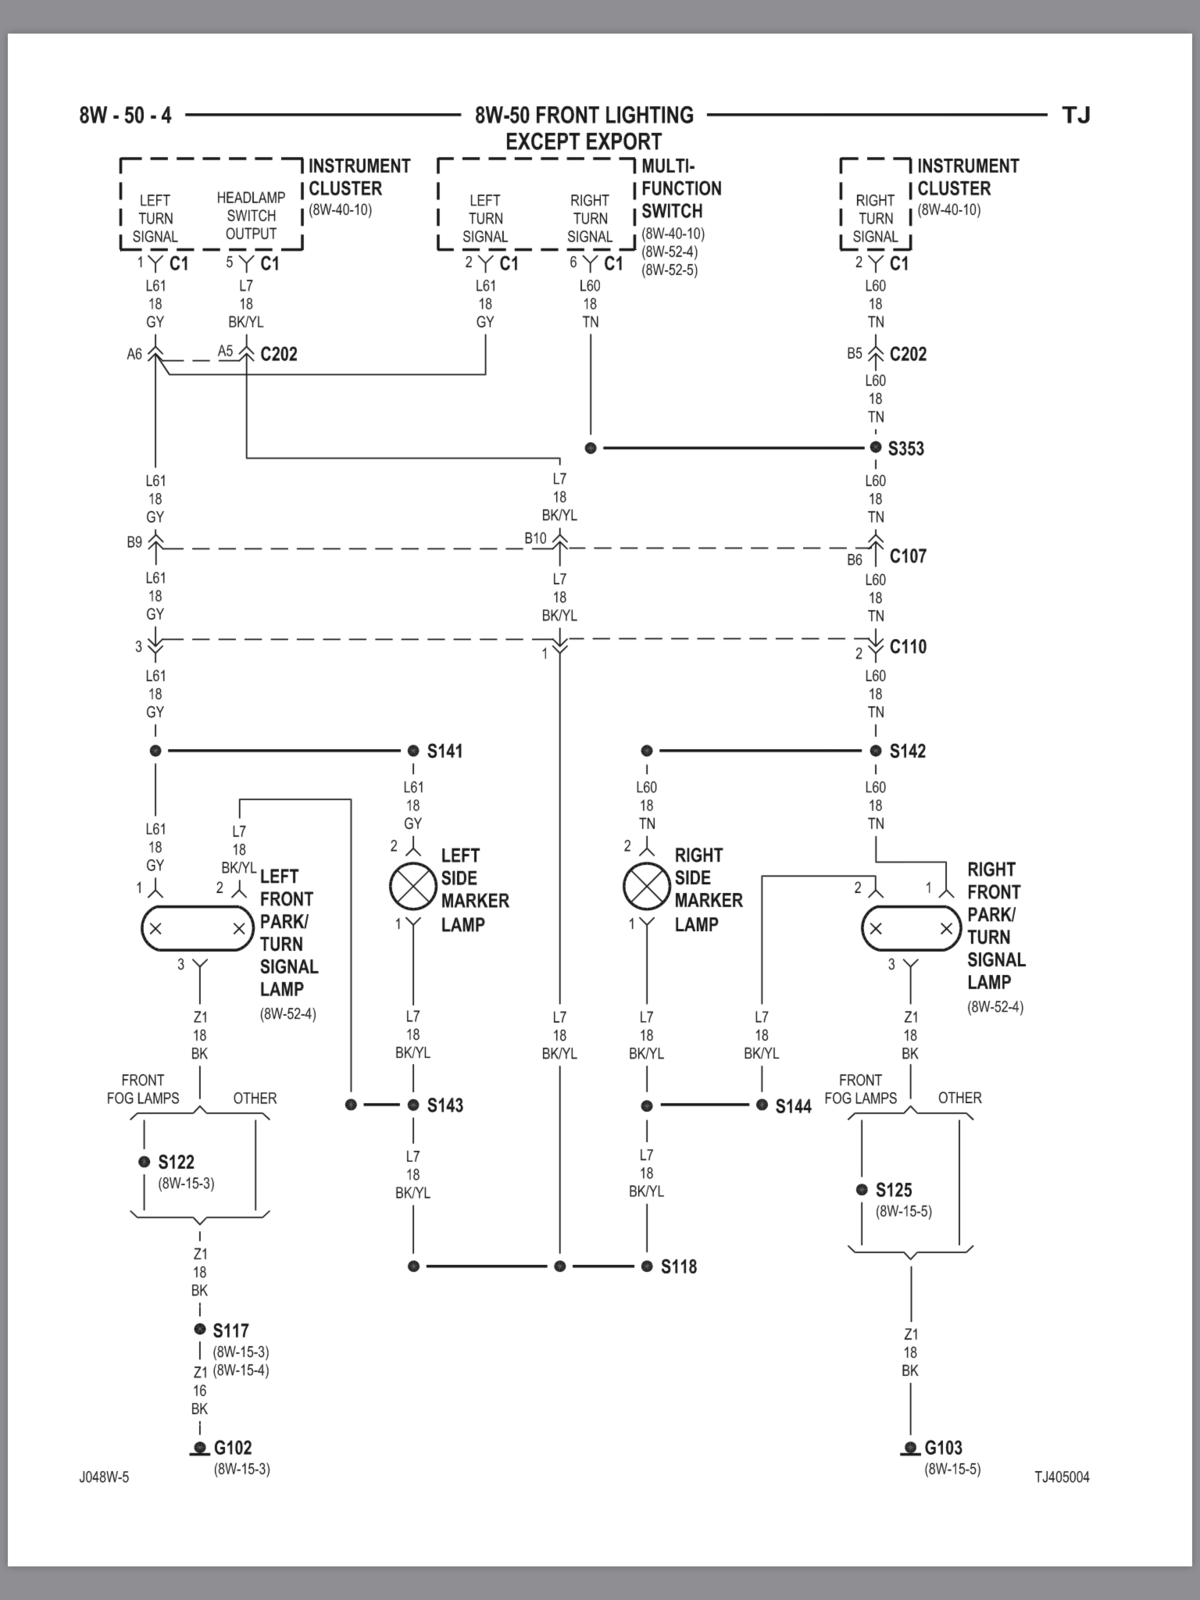 Wiring Guide or Diagram | Jeep Wrangler TJ Forum 87 Jeep Wrangler Wiring Diagram Jeep Wrangler TJ Forum